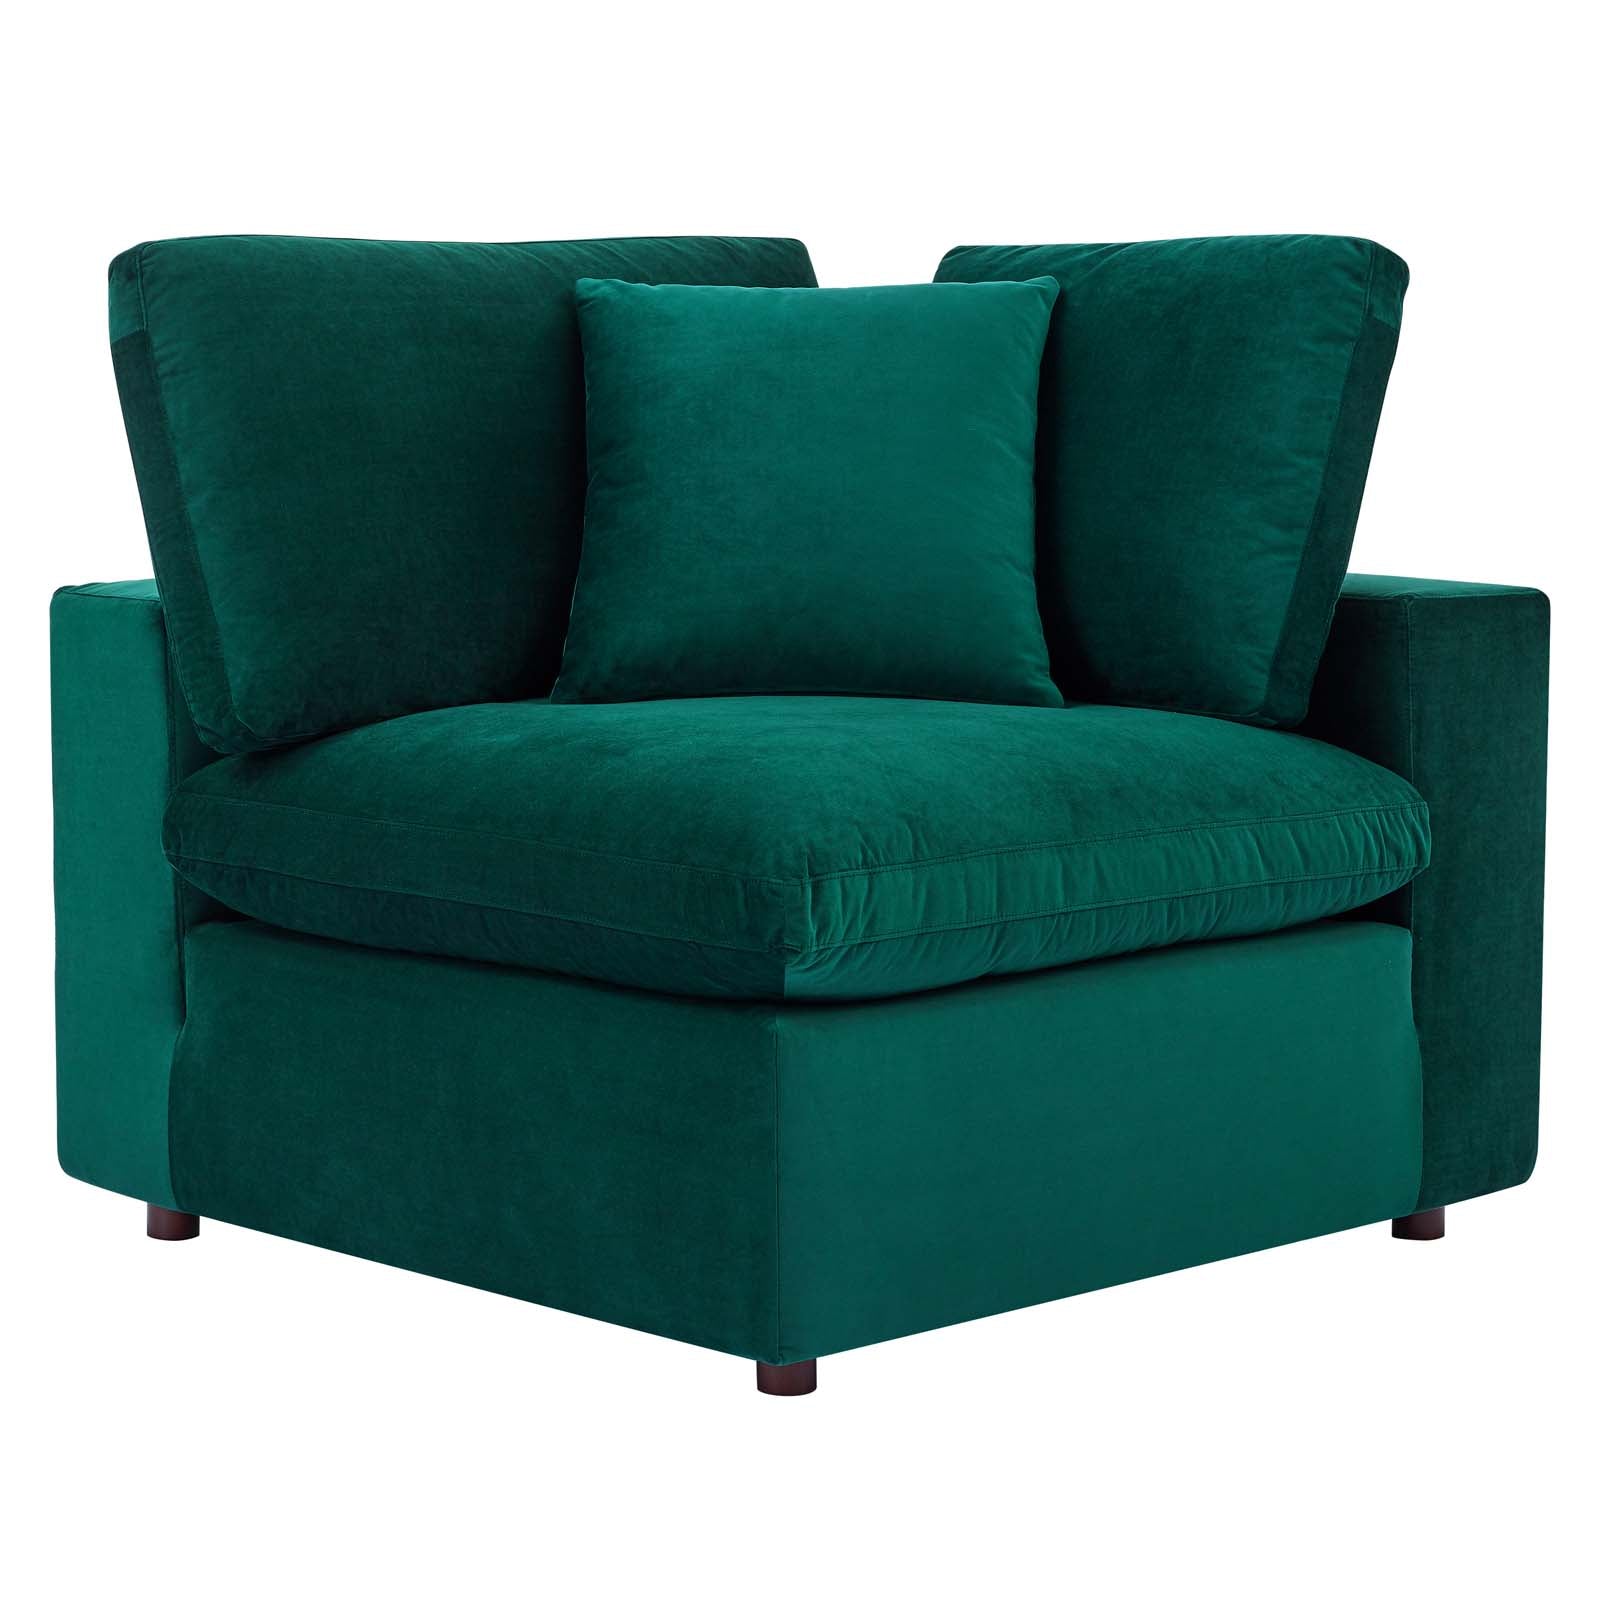 Modway Sectional Sofas - Commix Overstuffed Performance Velvet 6-Piece Sectional Sofa Green